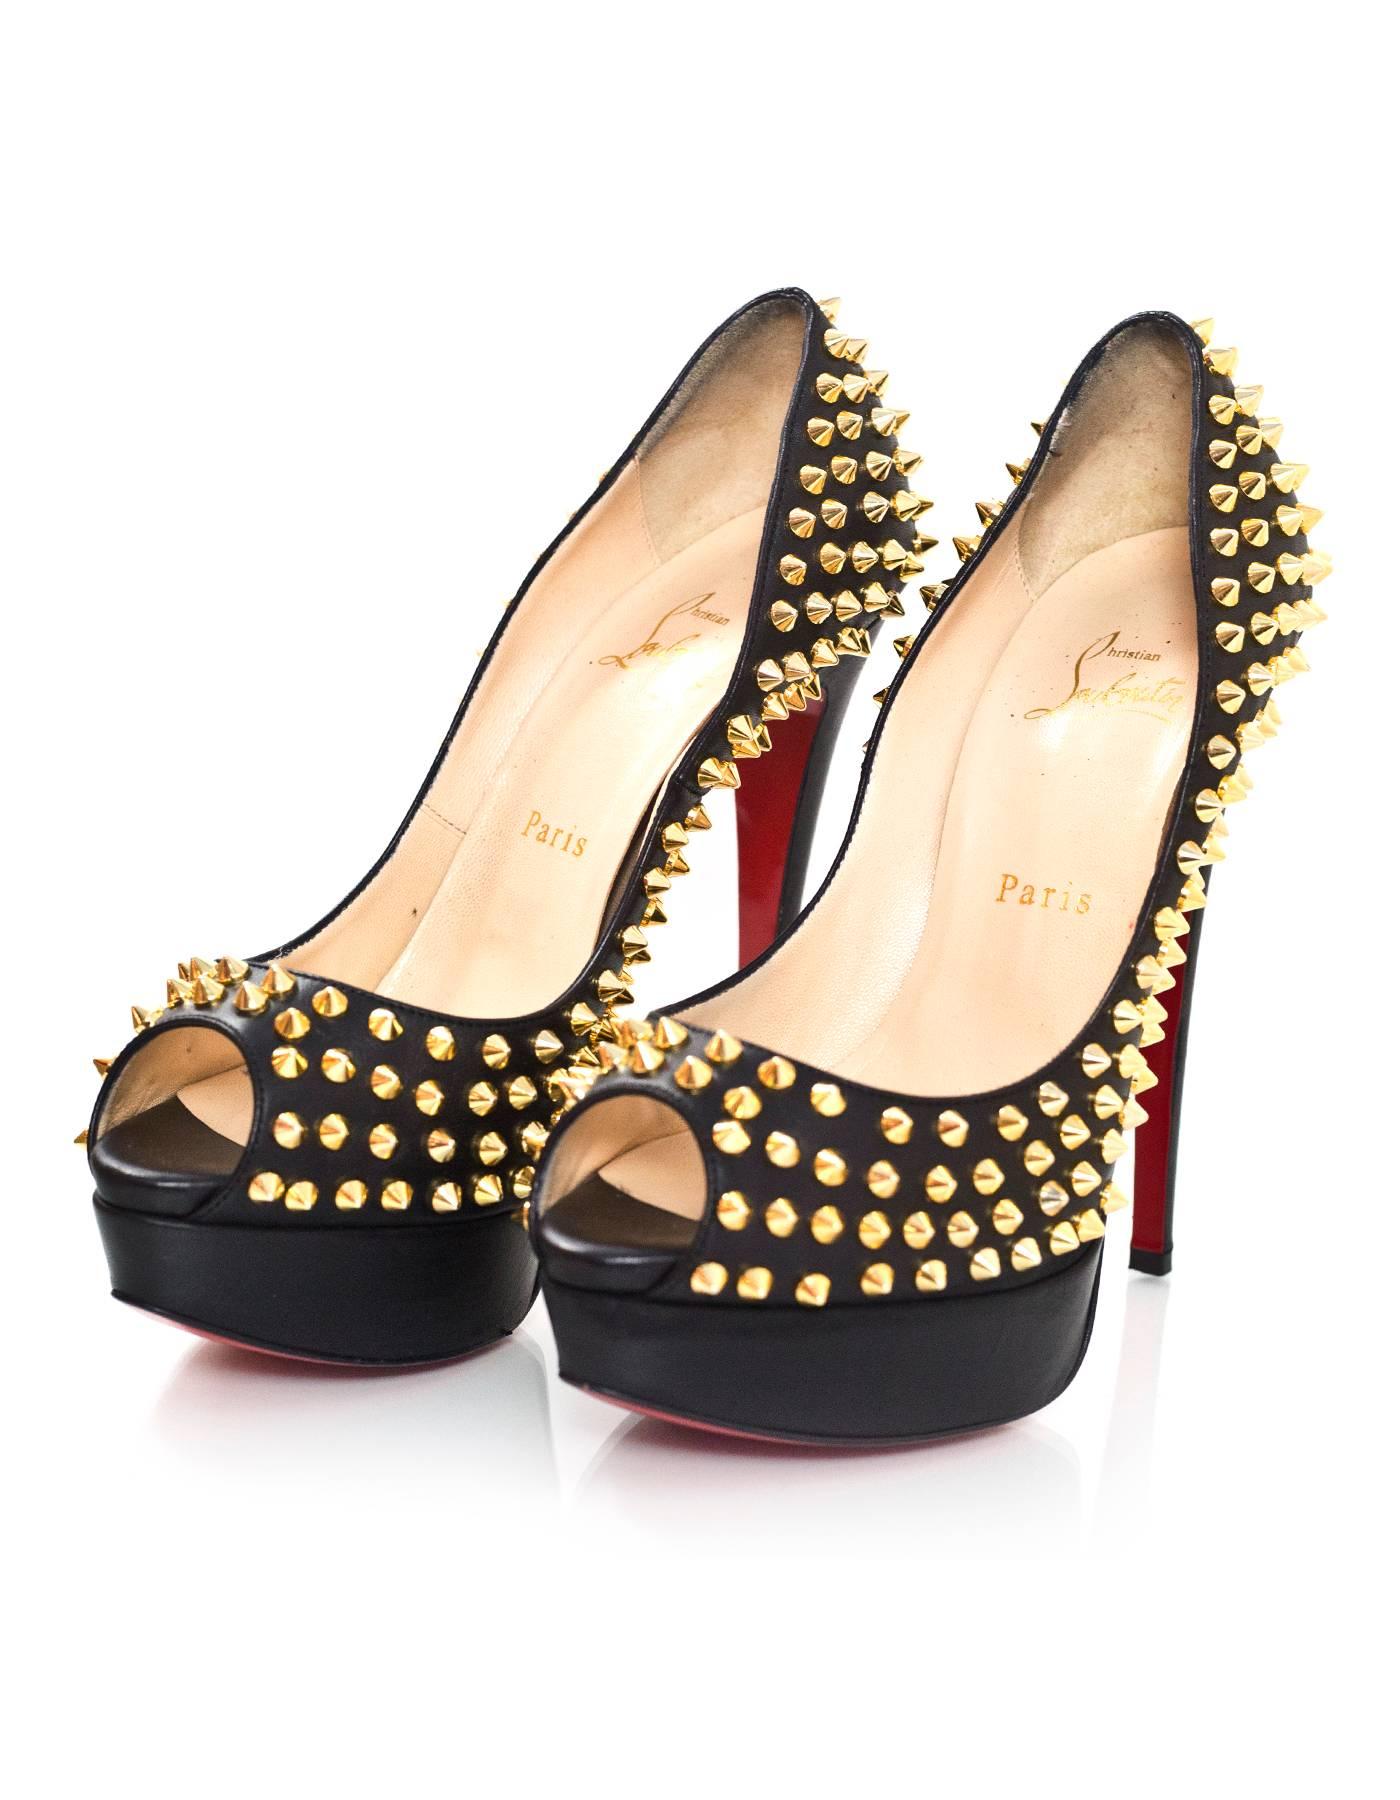 Christian Louboutin Black & Gold Lady Peep Spikes 150 Pumps Sz 38.5

Made In: Italy
Color: Black, gold
Materials: Leather, metal
Closure/Opening: Slide on
Sole Stamp: Christian Louboutin Made in Italy 38.5
Retail Price: $1,395 + tax
Overall